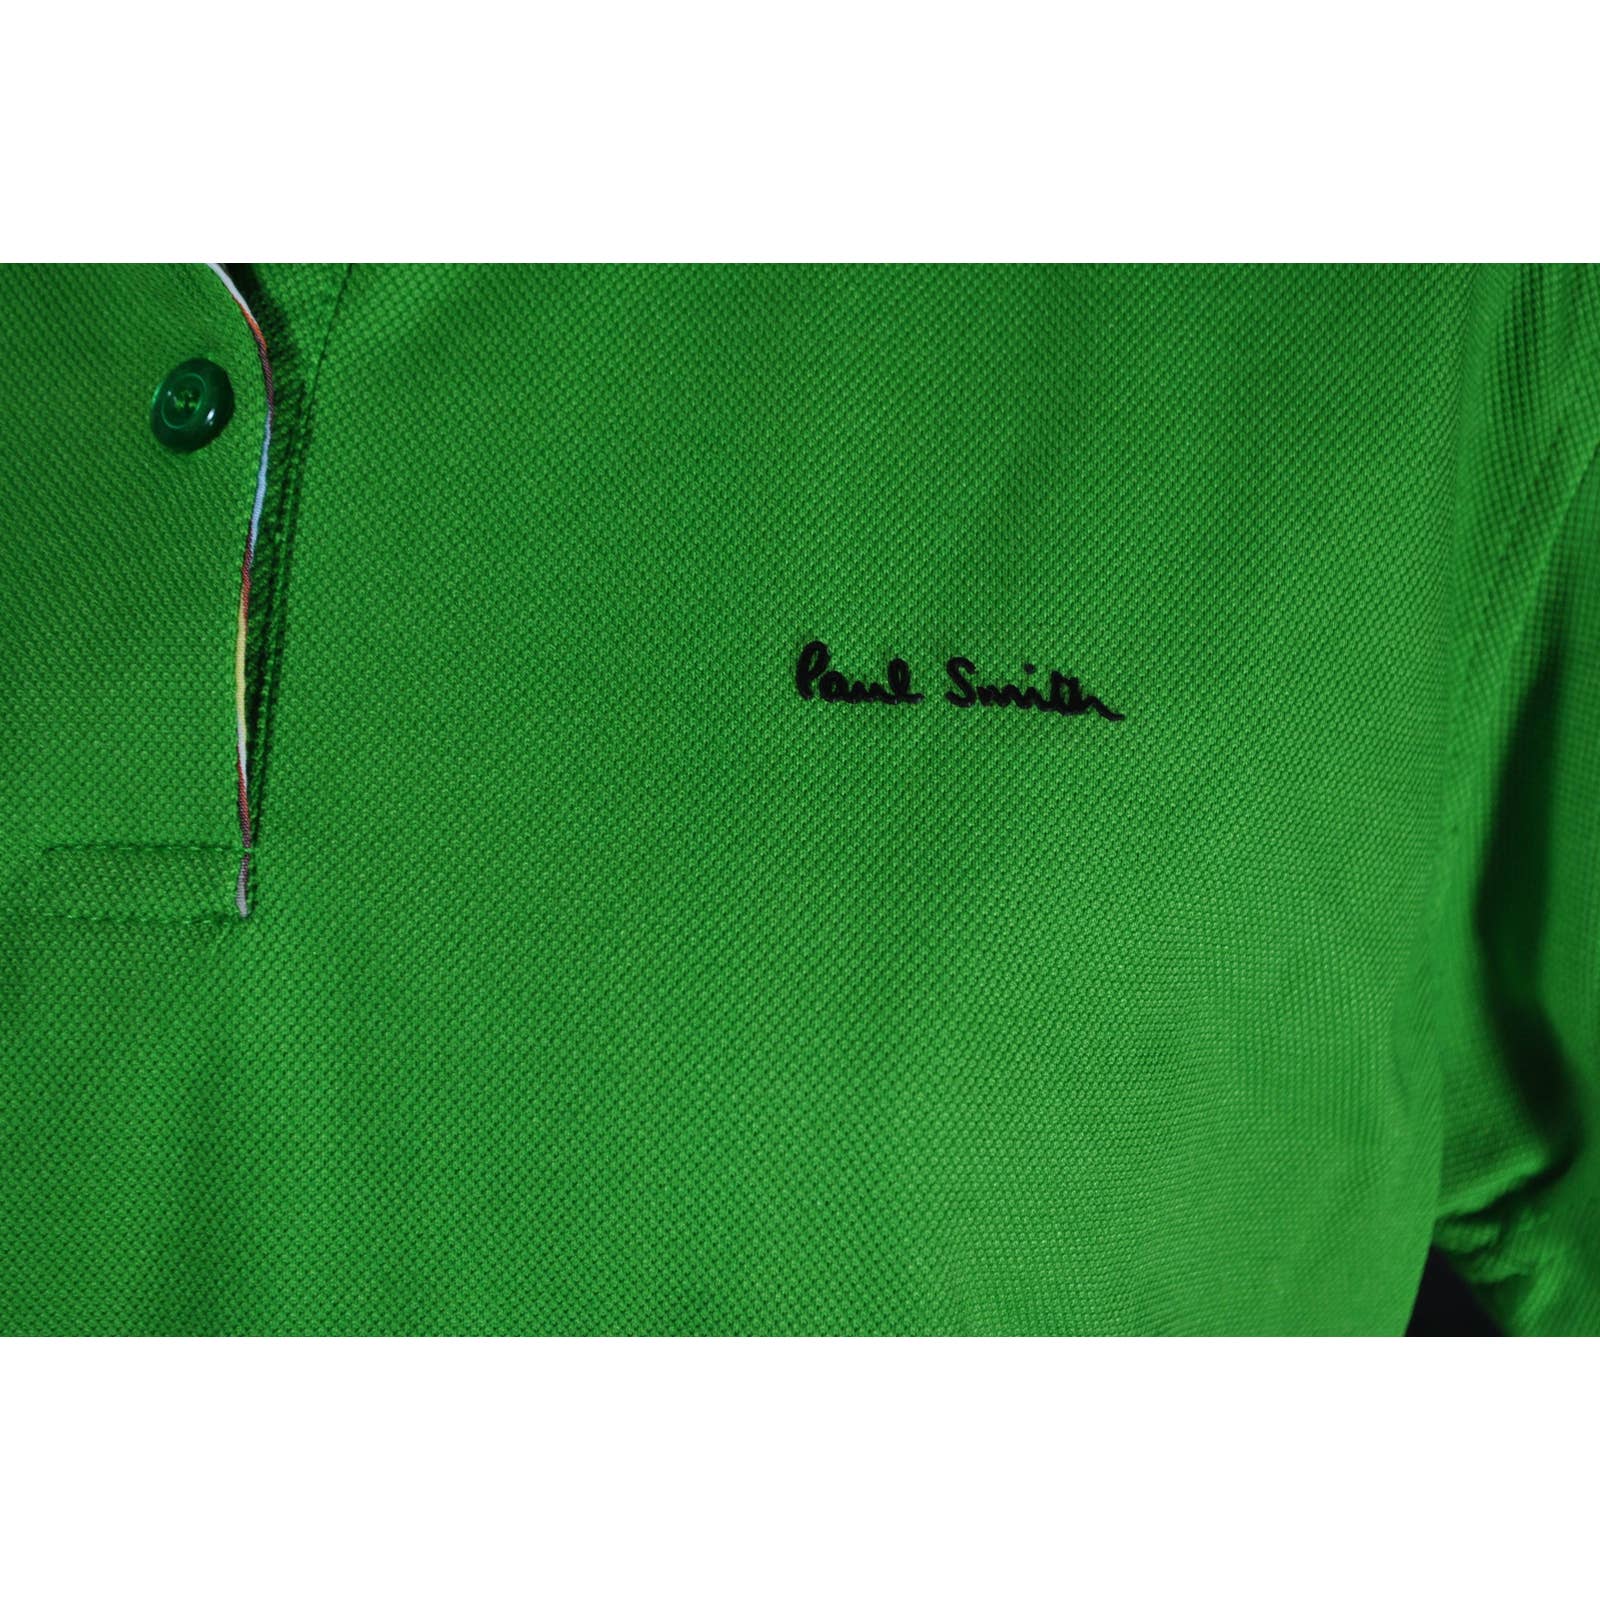 Vintage Paul Smith Green Cropped Polo Shirt